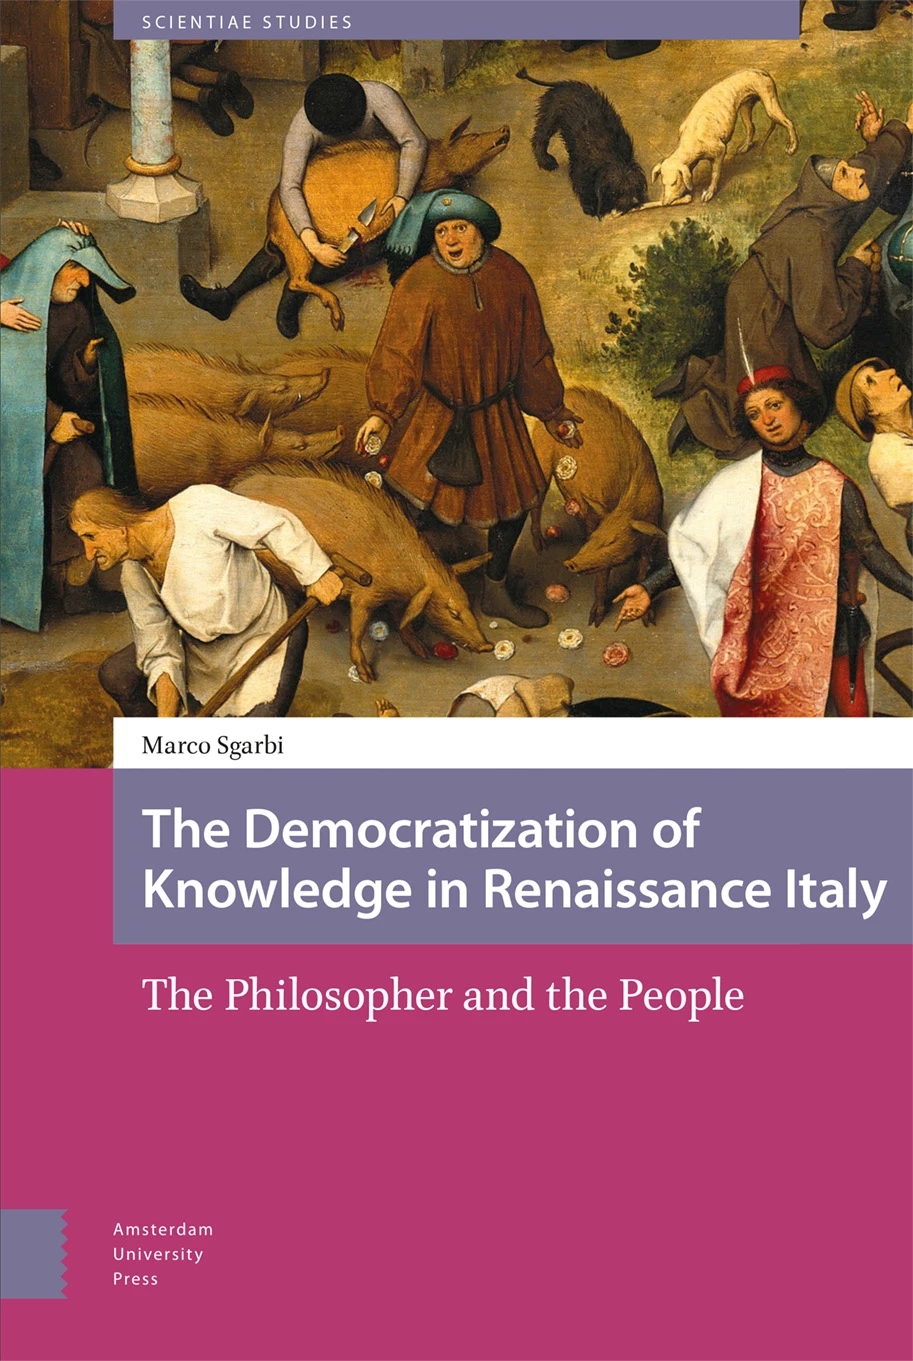 Marco Sgarbi‘s The Democratization of Knowledge in Renaissance Italy